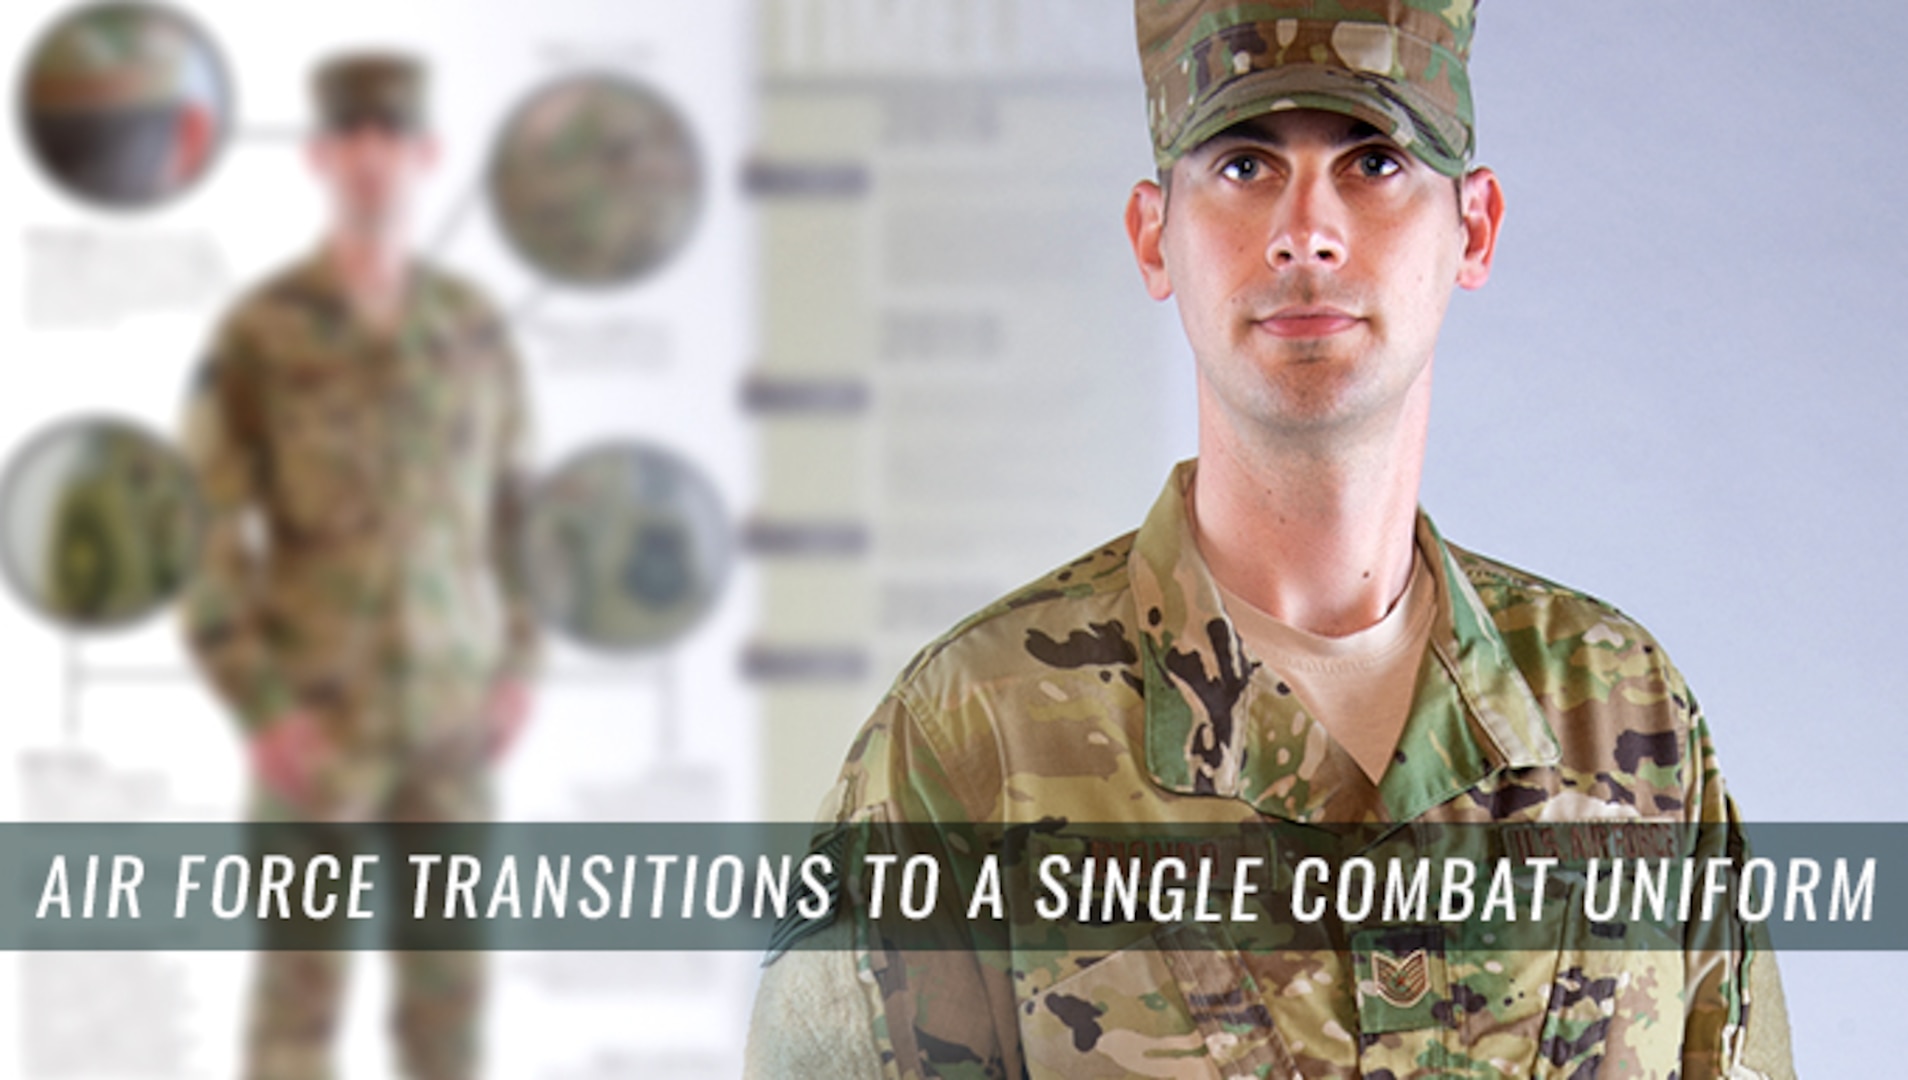 Soldiers can mix camo patterns for cold-weather gear > National Guard >  Article View